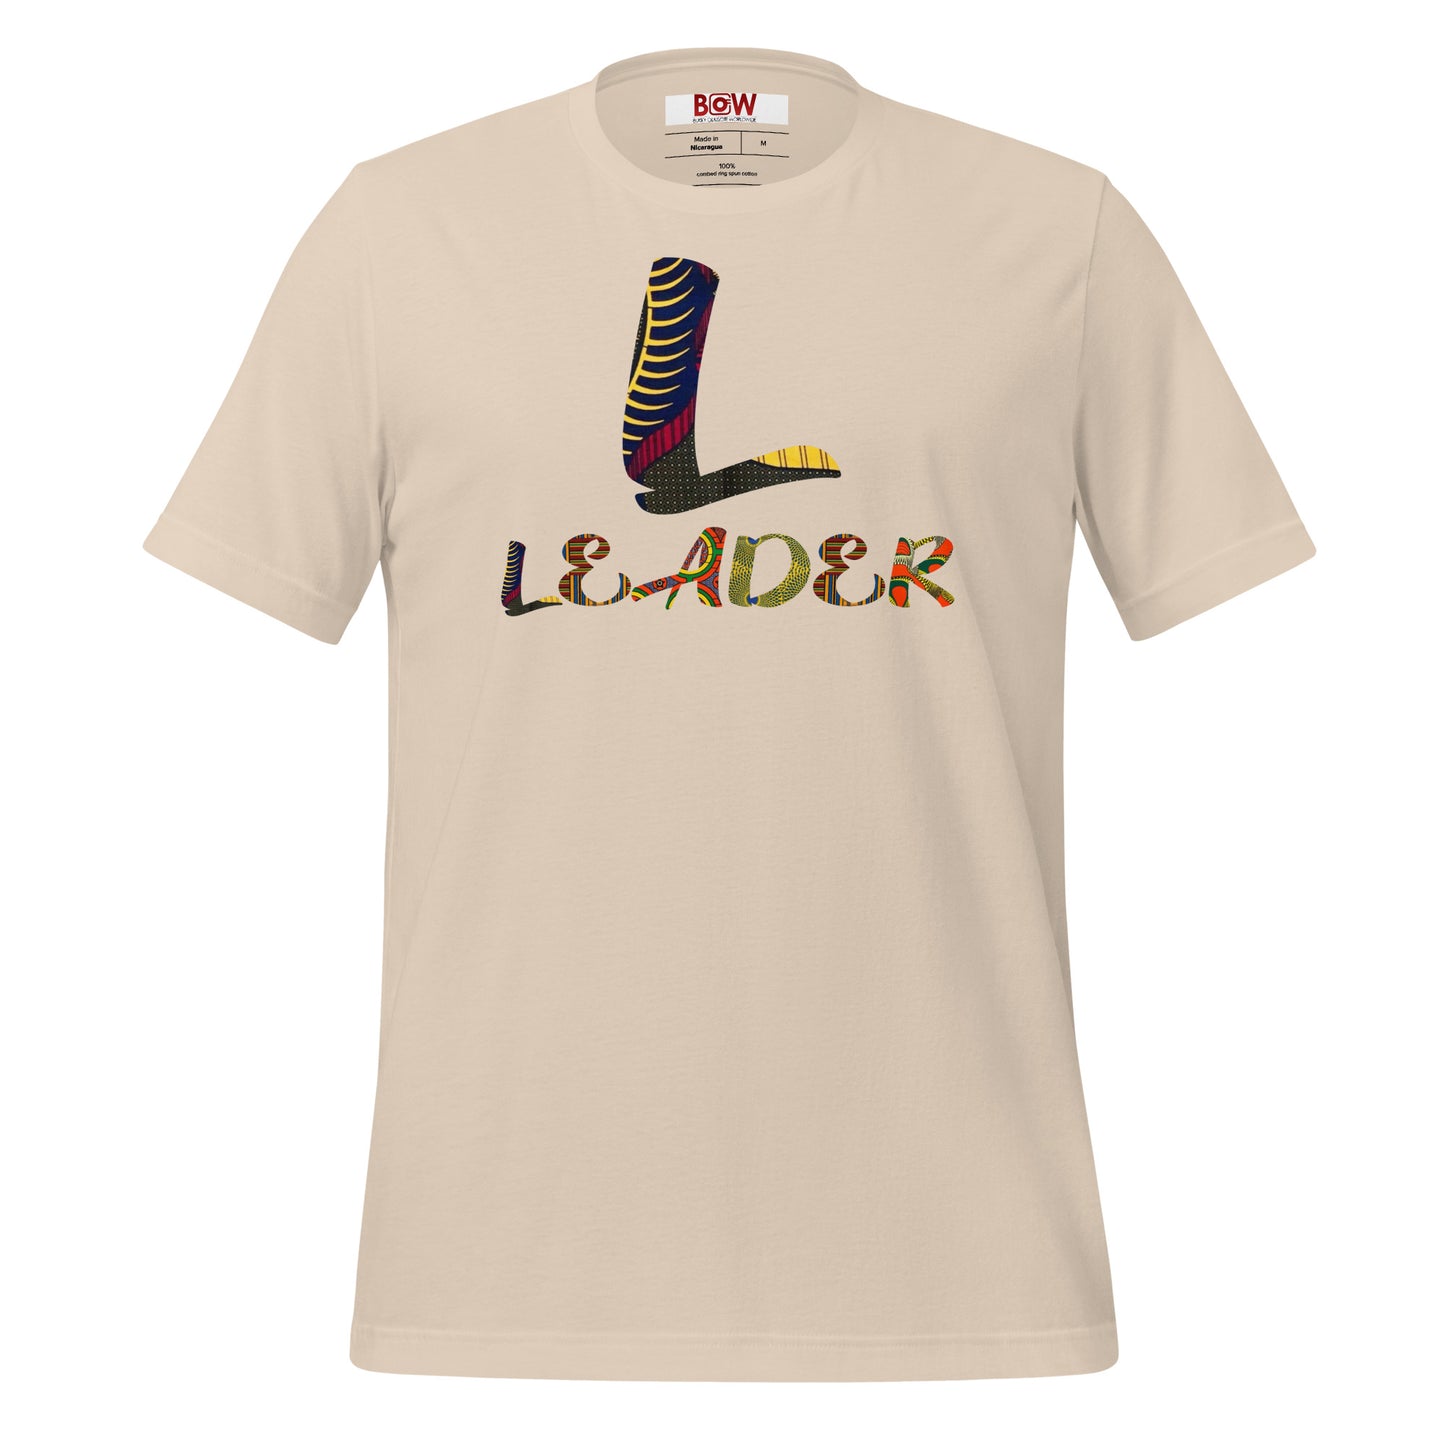 L For Leader Unisex Afro Graphic T-Shirt